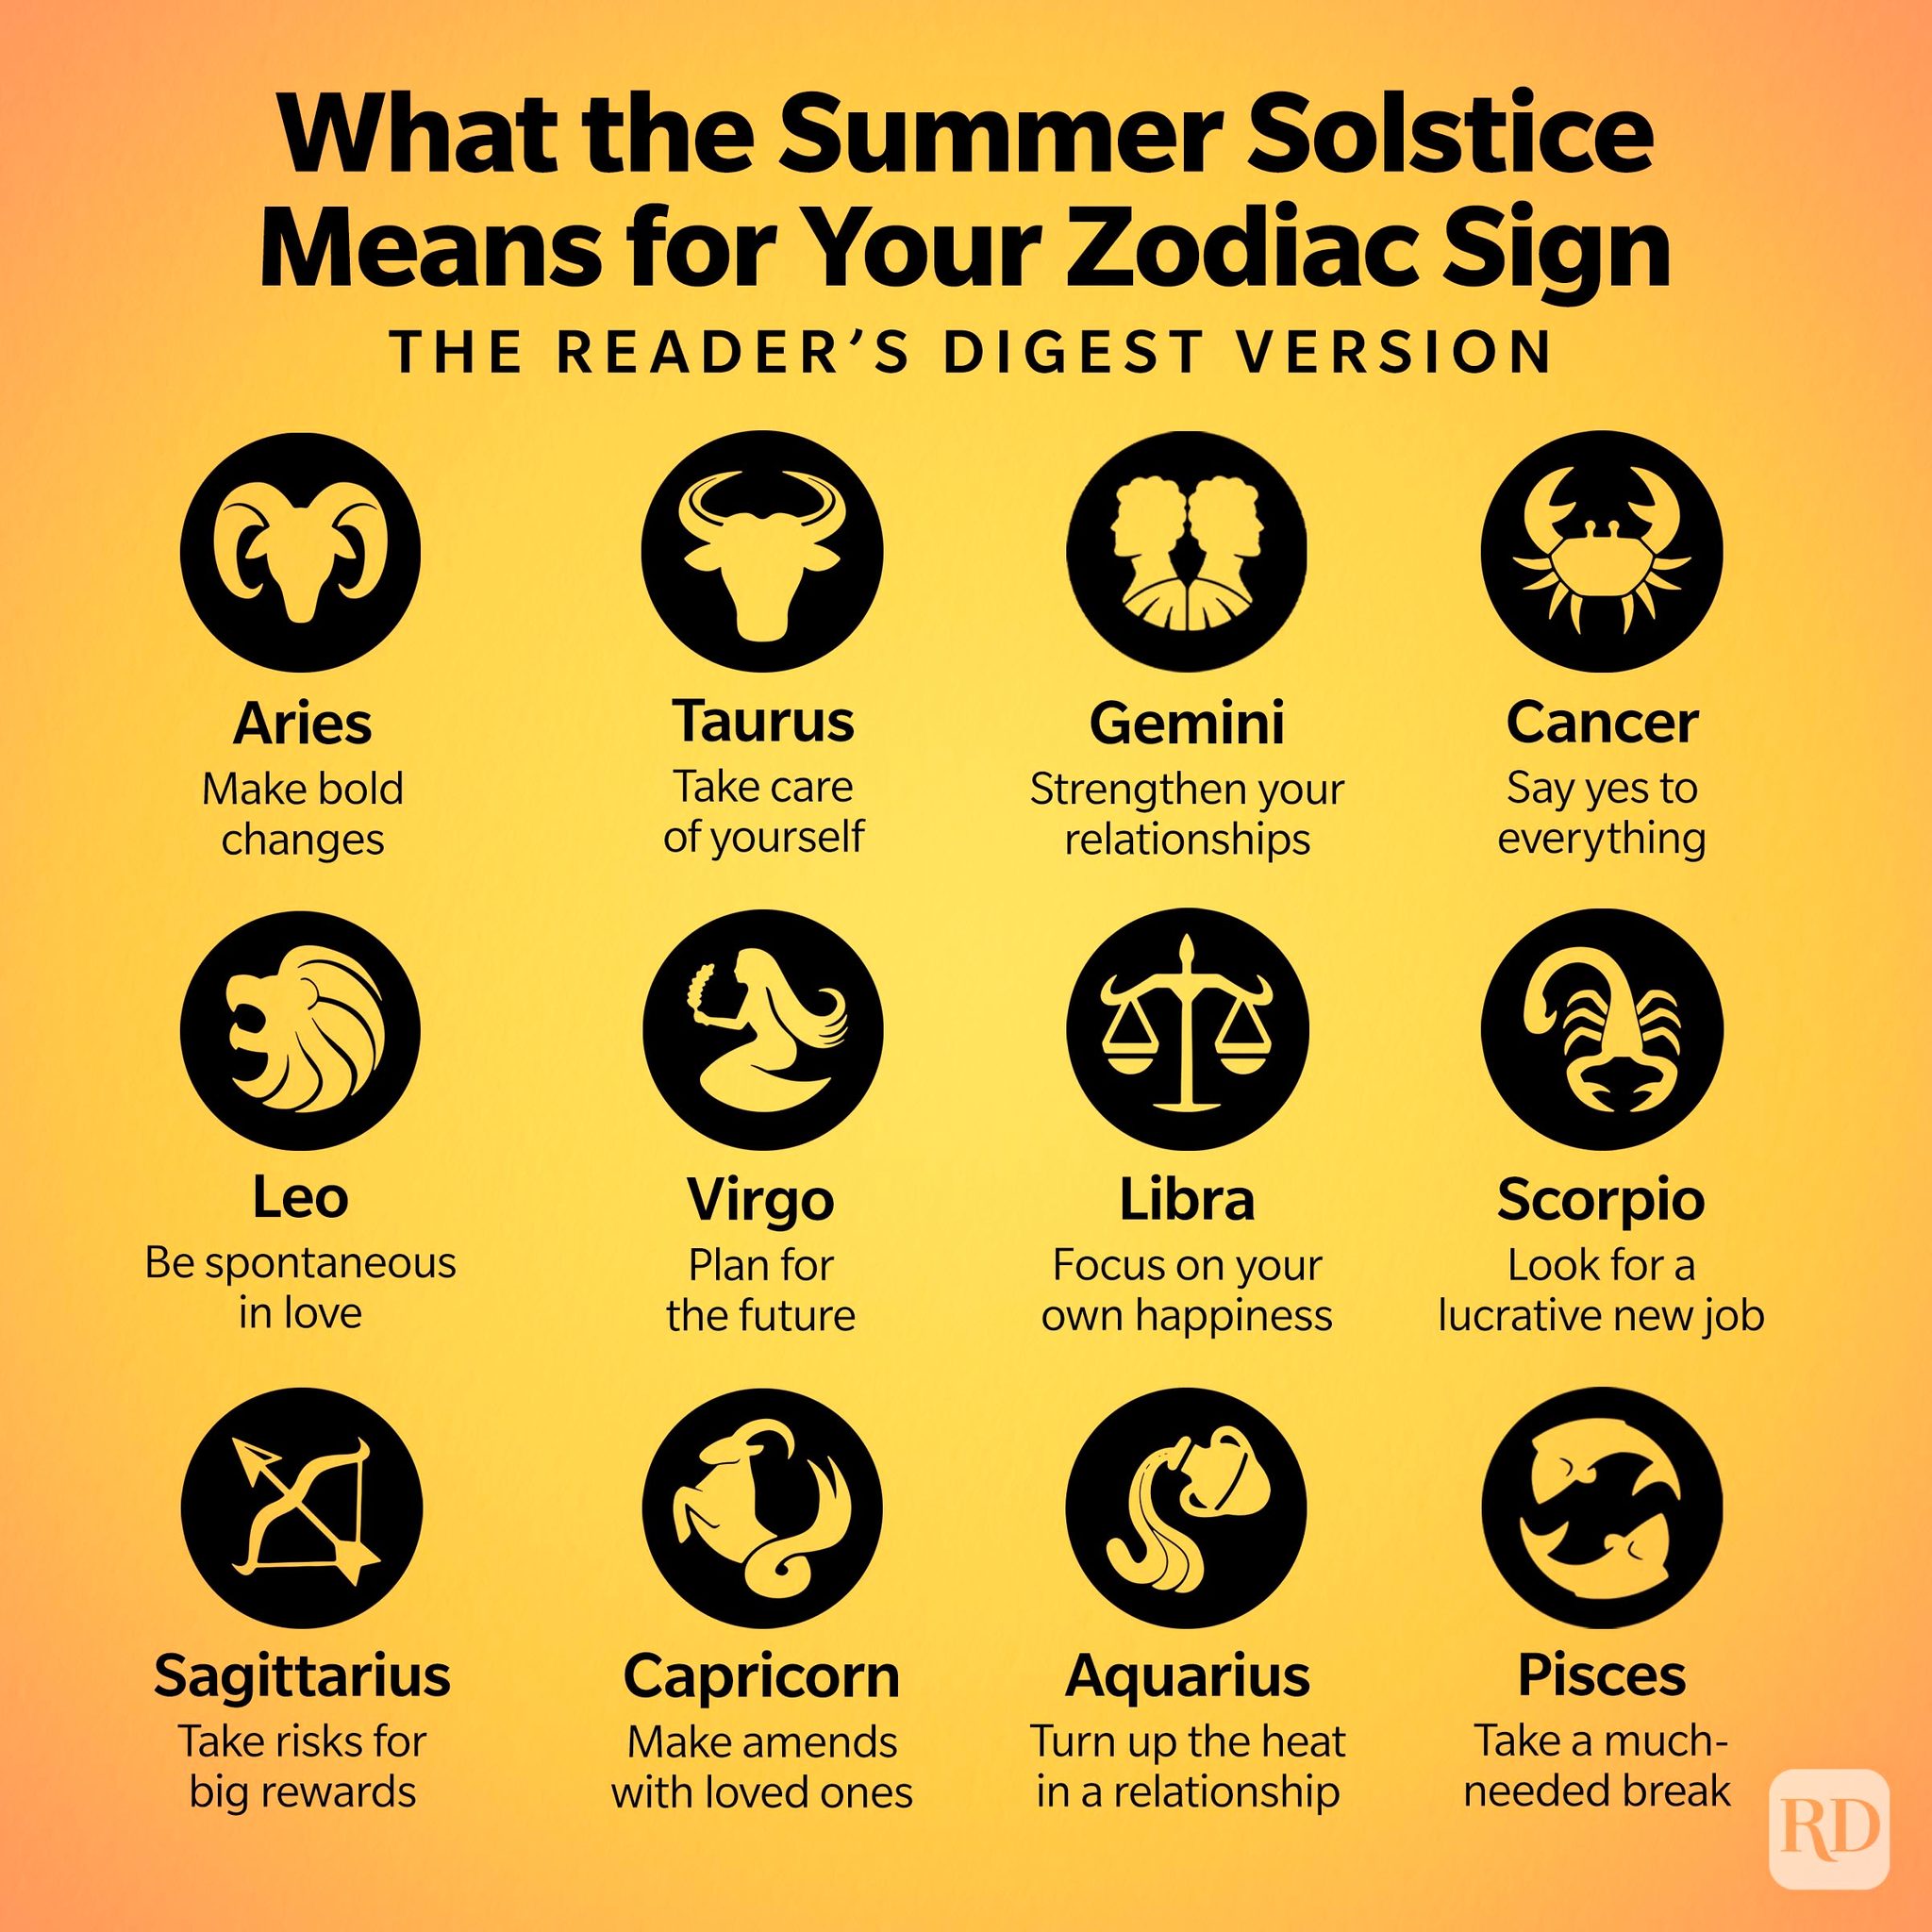 What the 2023 Summer Solstice Means for Your Zodiac 2023 Horoscope